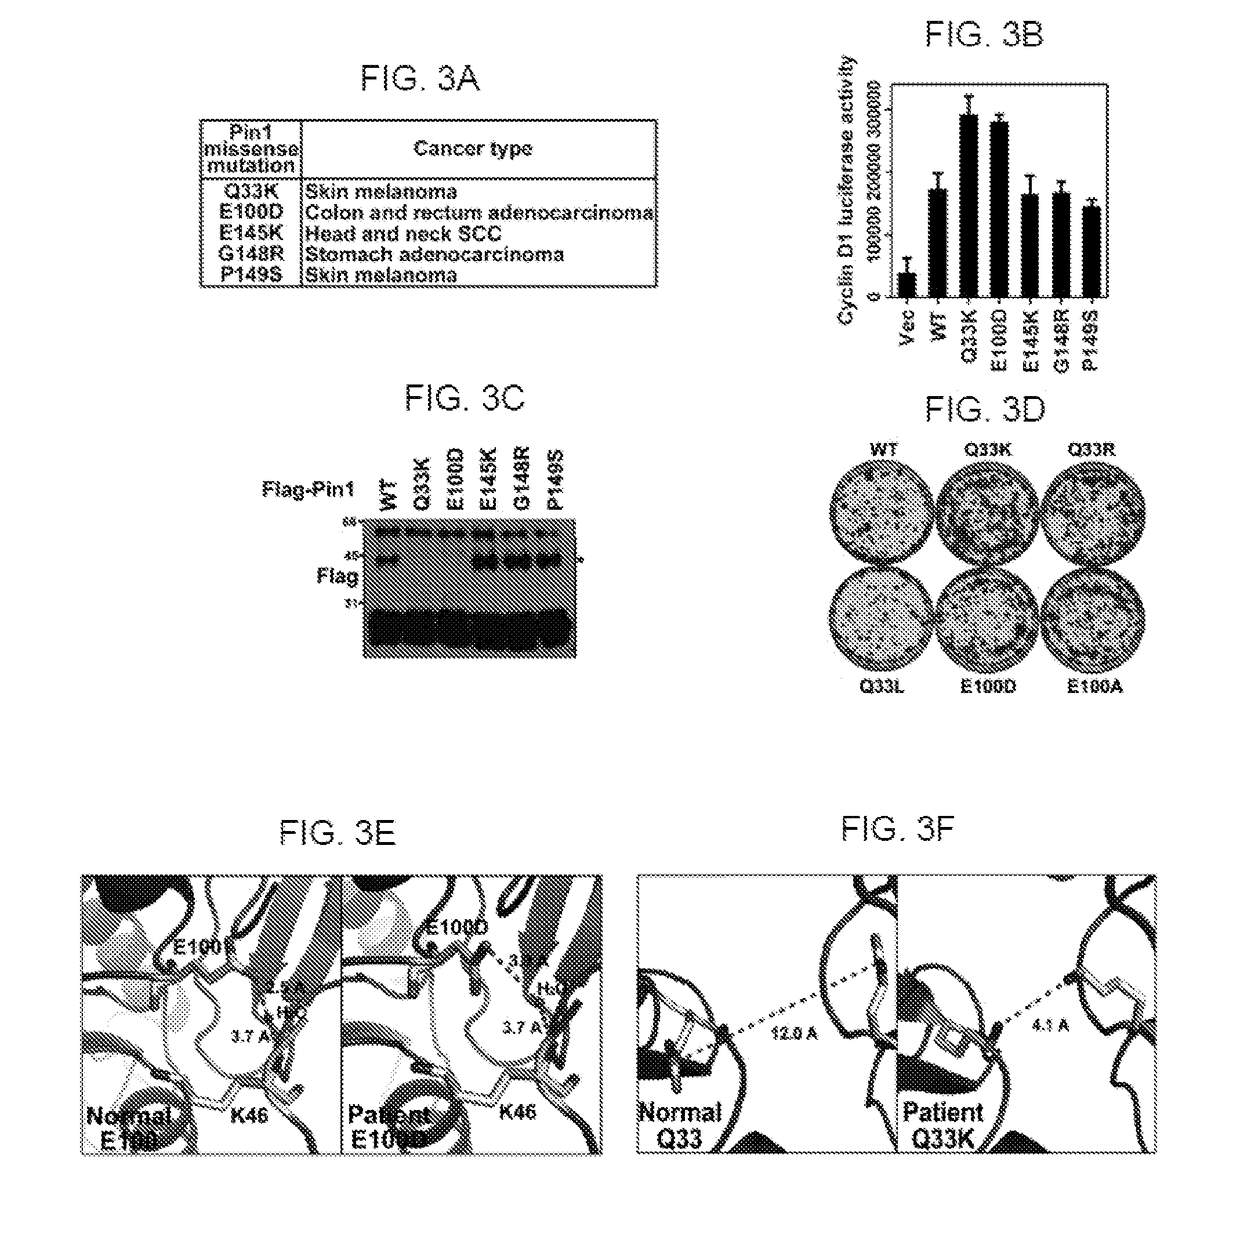 ATRA for modulating Pin1 activity and stability